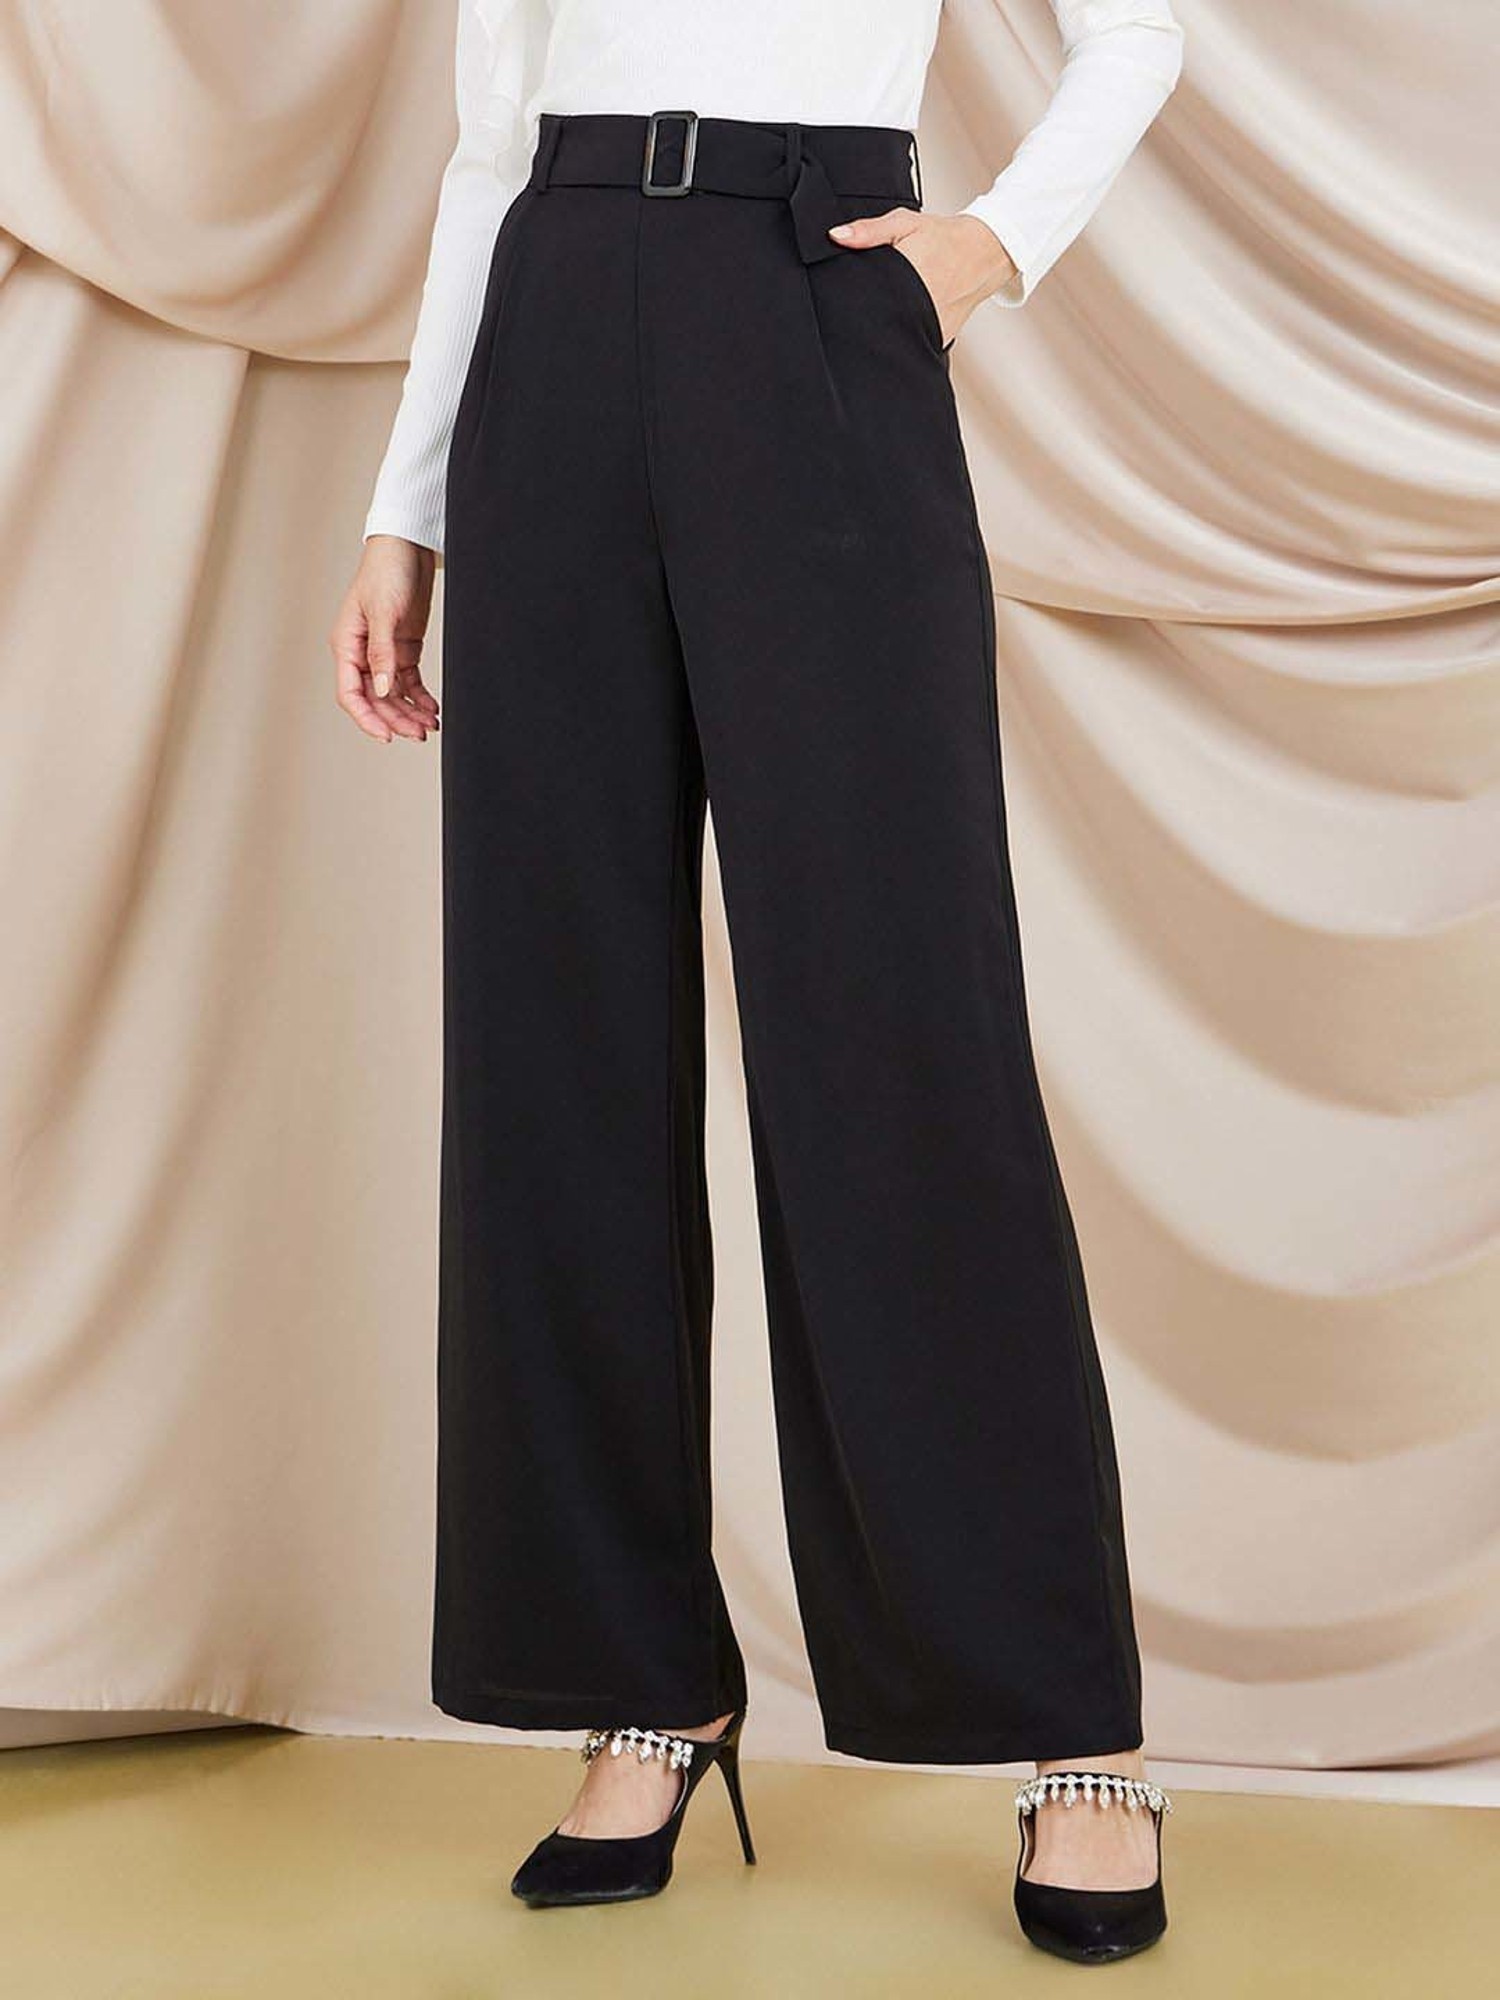 Pleated Wide Leg Pants Palazzo Formal Dressy Large Party Business | eBay